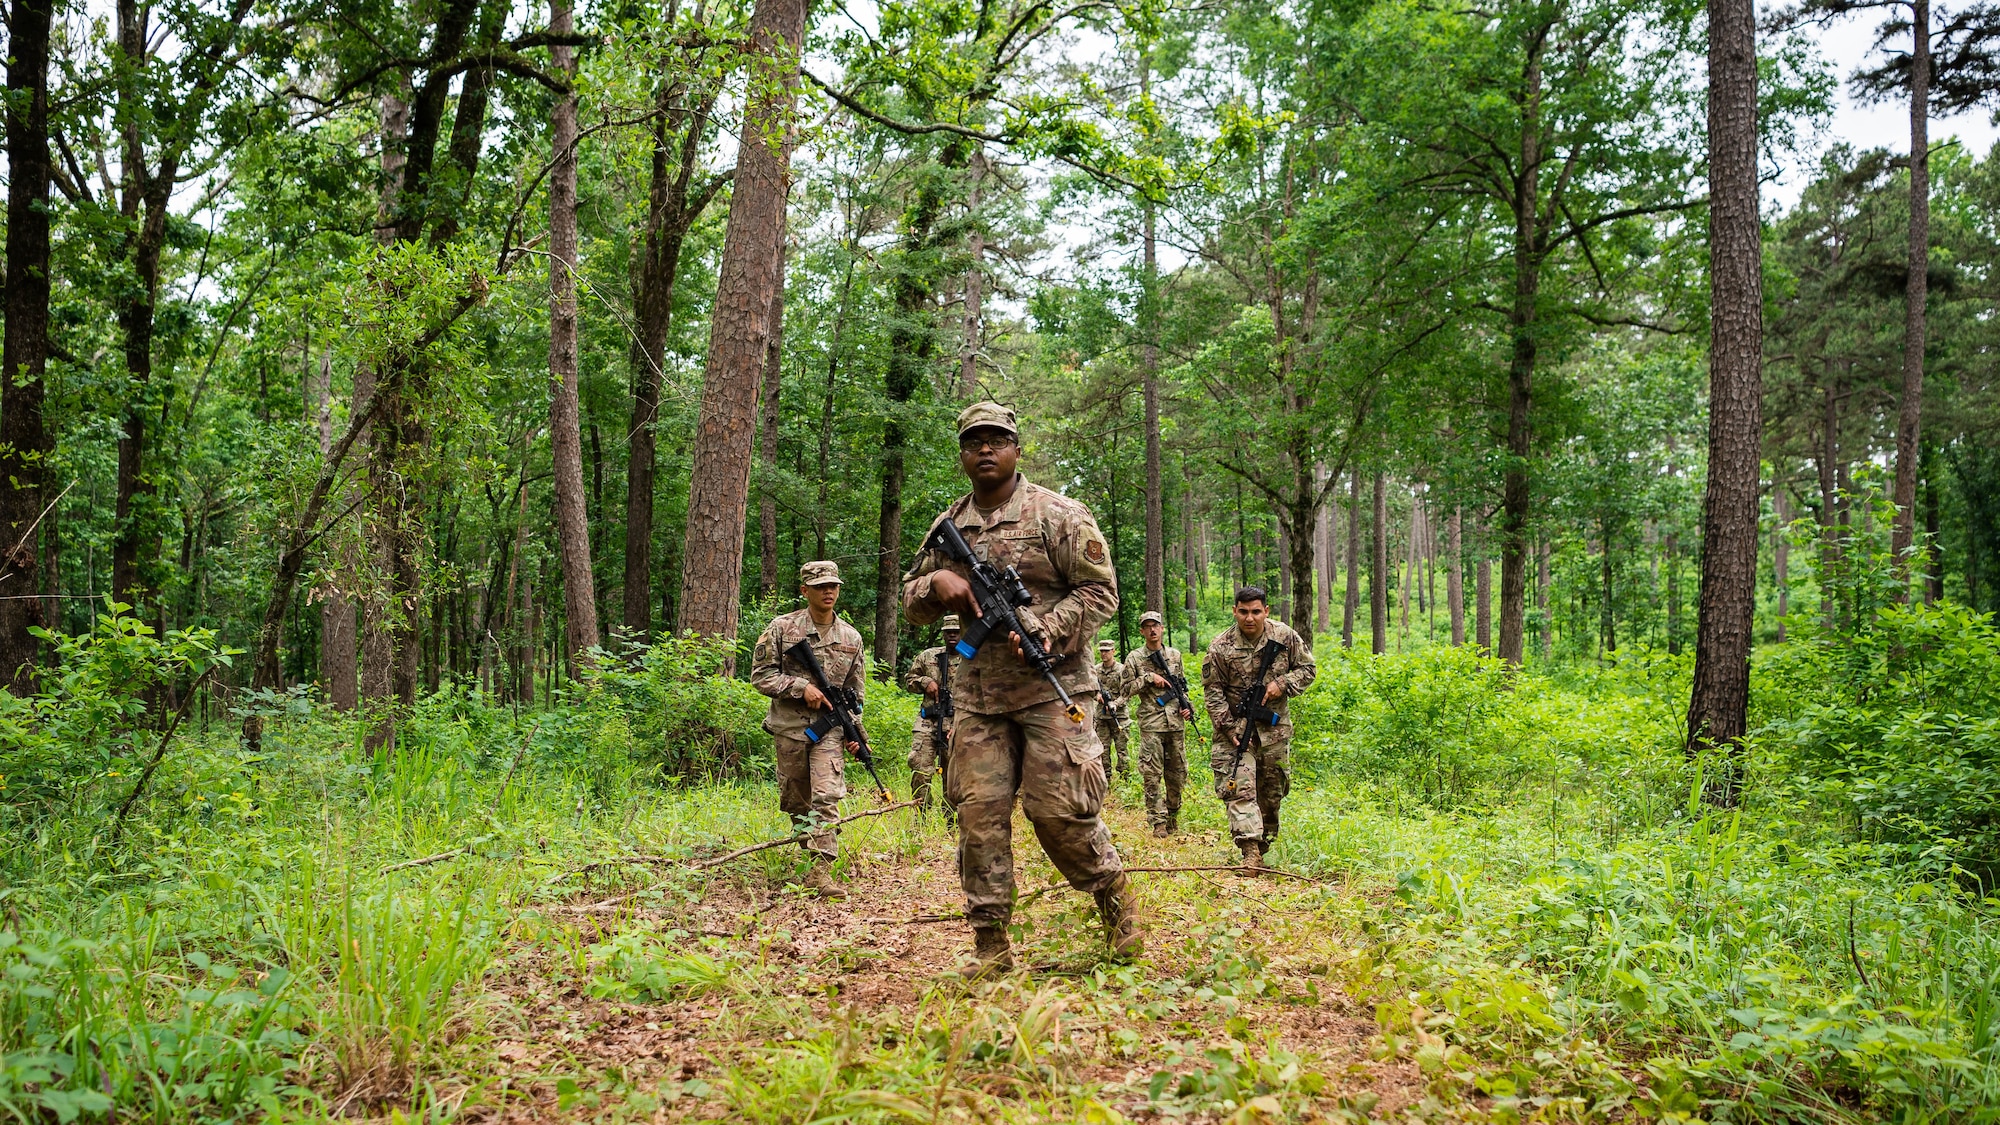 Airmen from the 2nd Civil Engineer Squadron perform individual movement techniques and unidentified explosive ordnance identification during a 2nd CES training exercise at Barksdale Air Force Base, Louisiana, May 20, 2021. Training operational skills such as land navigation, weapons assembly and individual movement techniques, the 2nd CES intensified the readiness of its engineers, allowing the unit to better adapt to changes in the national security environment and compete in the dynamic future of warfighting. (U.S. Air Force photo by Senior Airman Jacob B. Wrightsman)